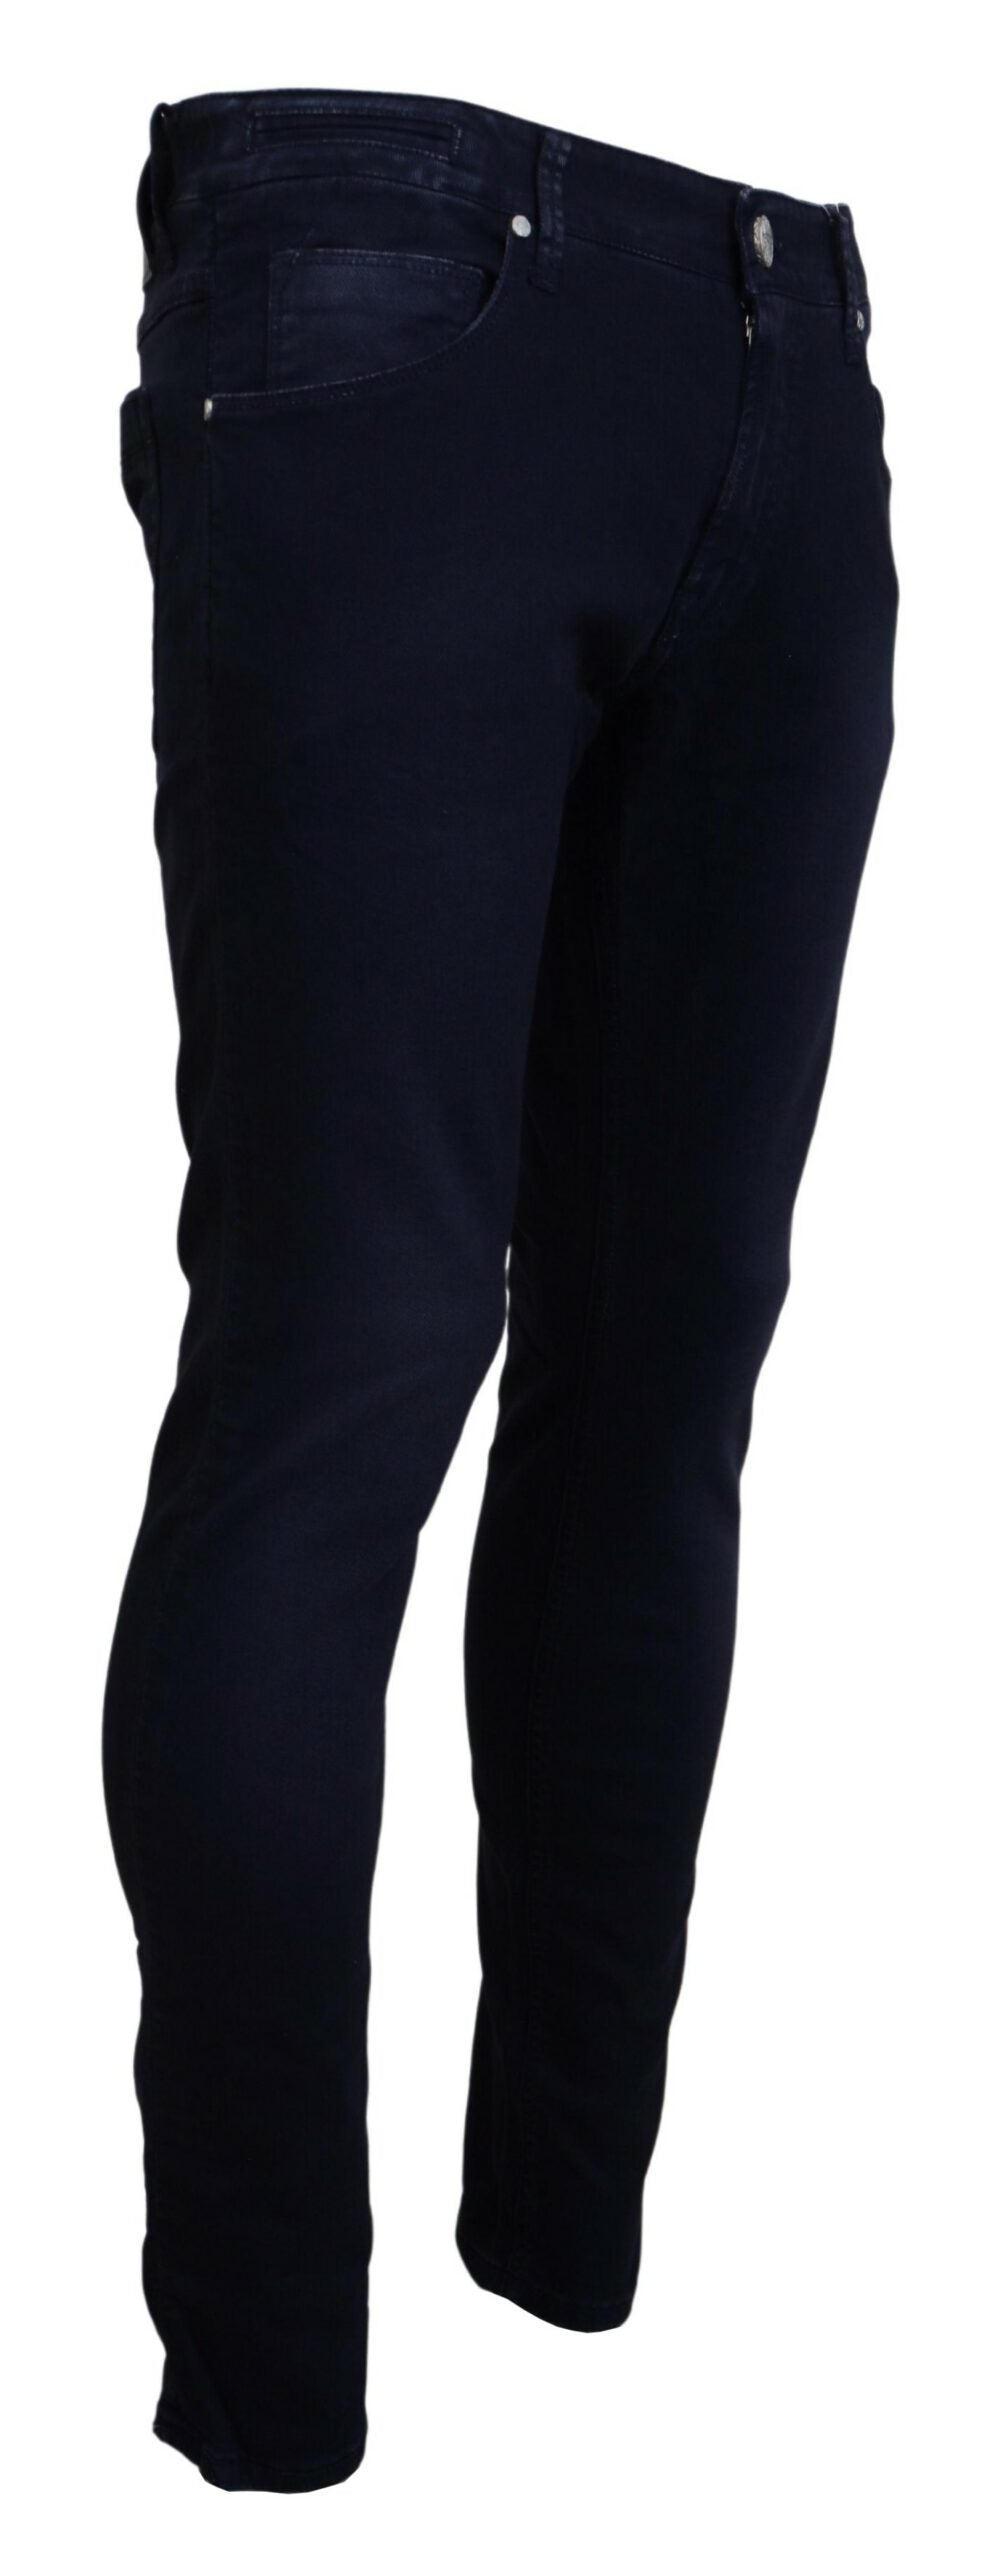 Acht Blue Cotton Tapered Slim Fit Men Casual Denim Jeans - Designed by Acht Available to Buy at a Discounted Price on Moon Behind The Hill Online Designer Discount Store